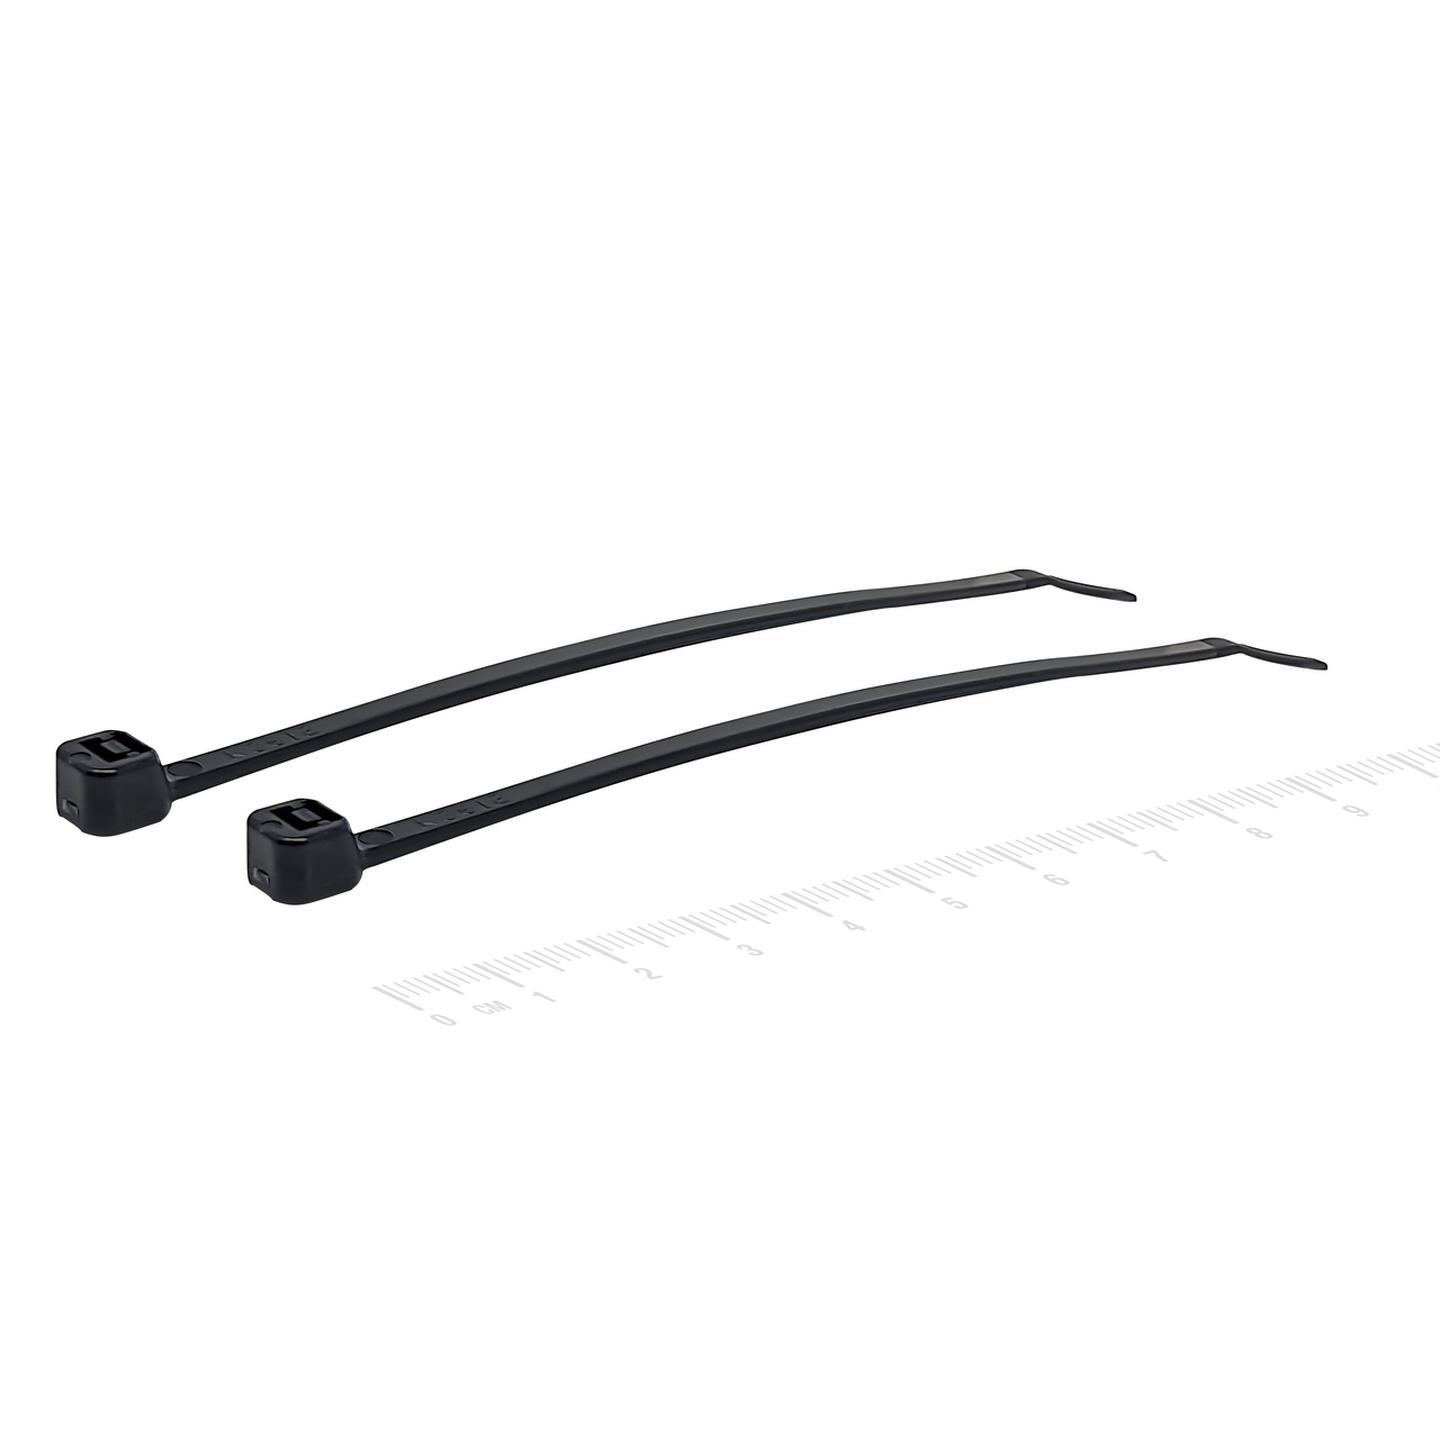 100mm Black Cable Ties - Pack of 100